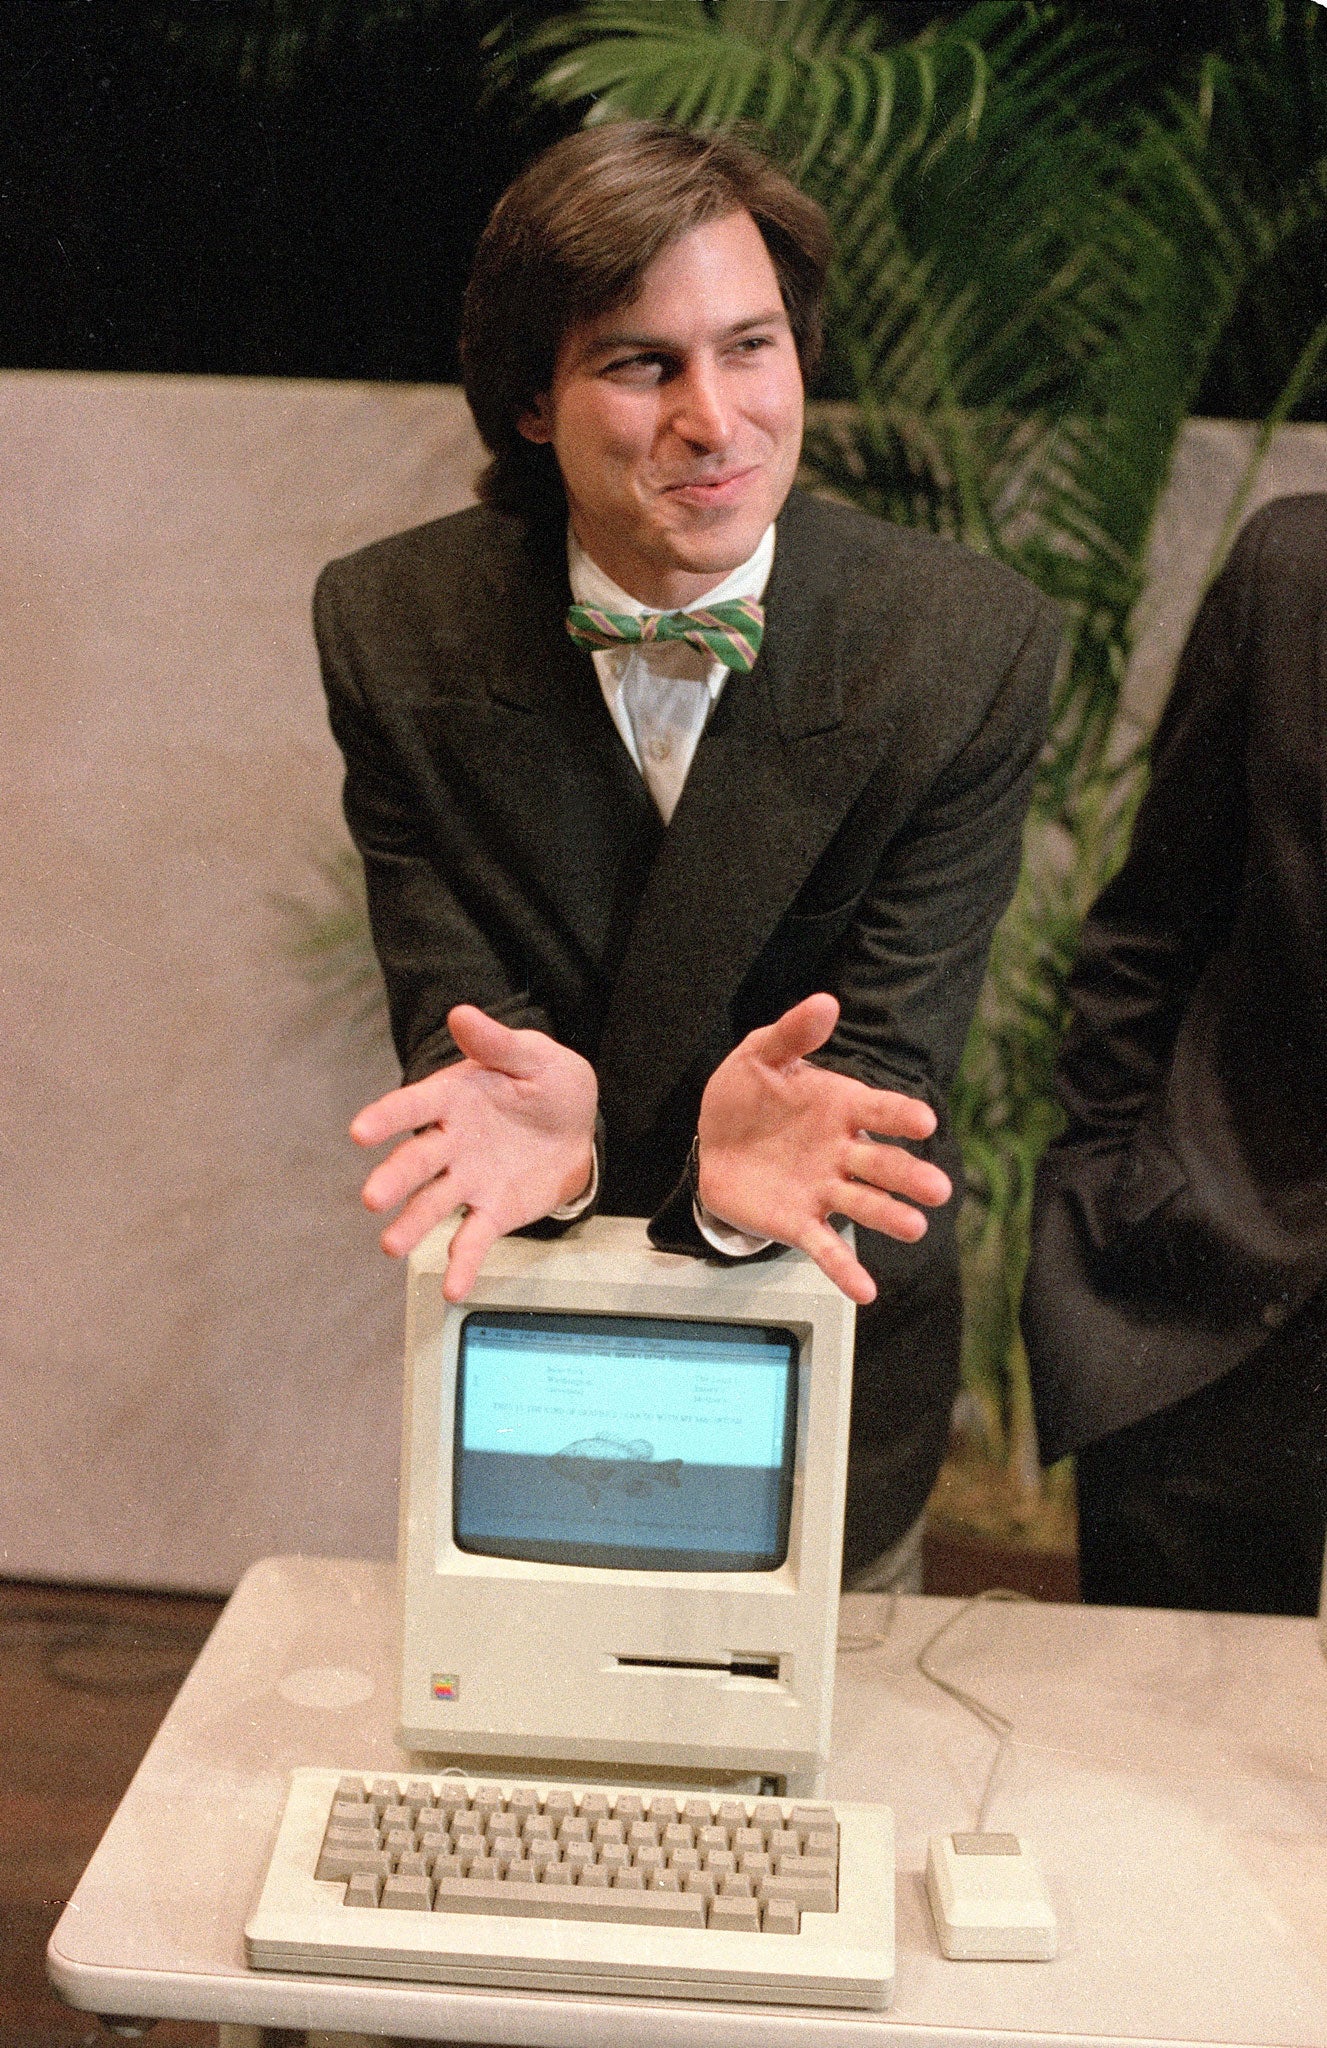 Steve Jobs leans on the new Macintosh personal computer in 1984